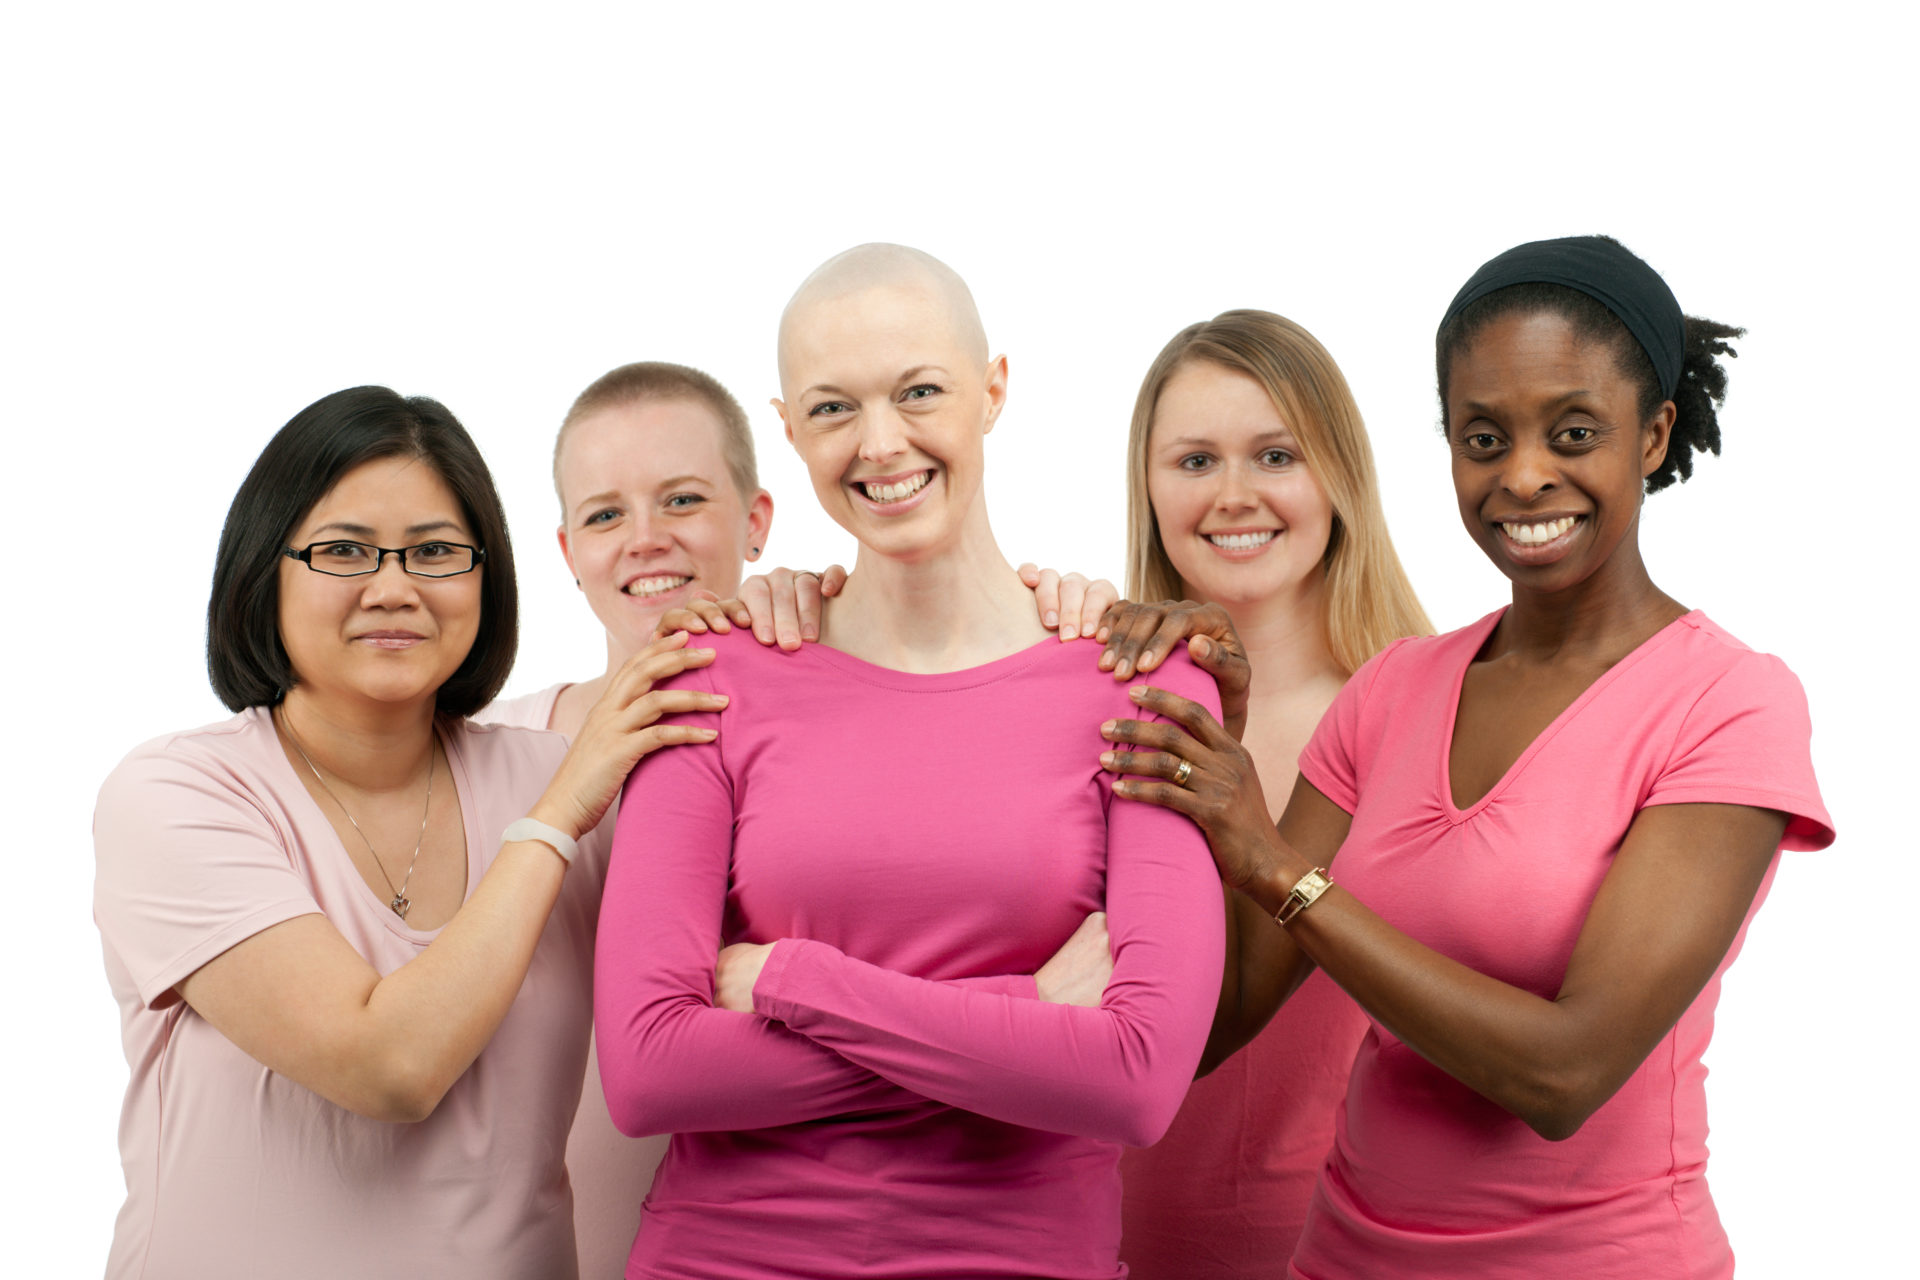 World Cancer Day is all about raising awareness and empowering patients